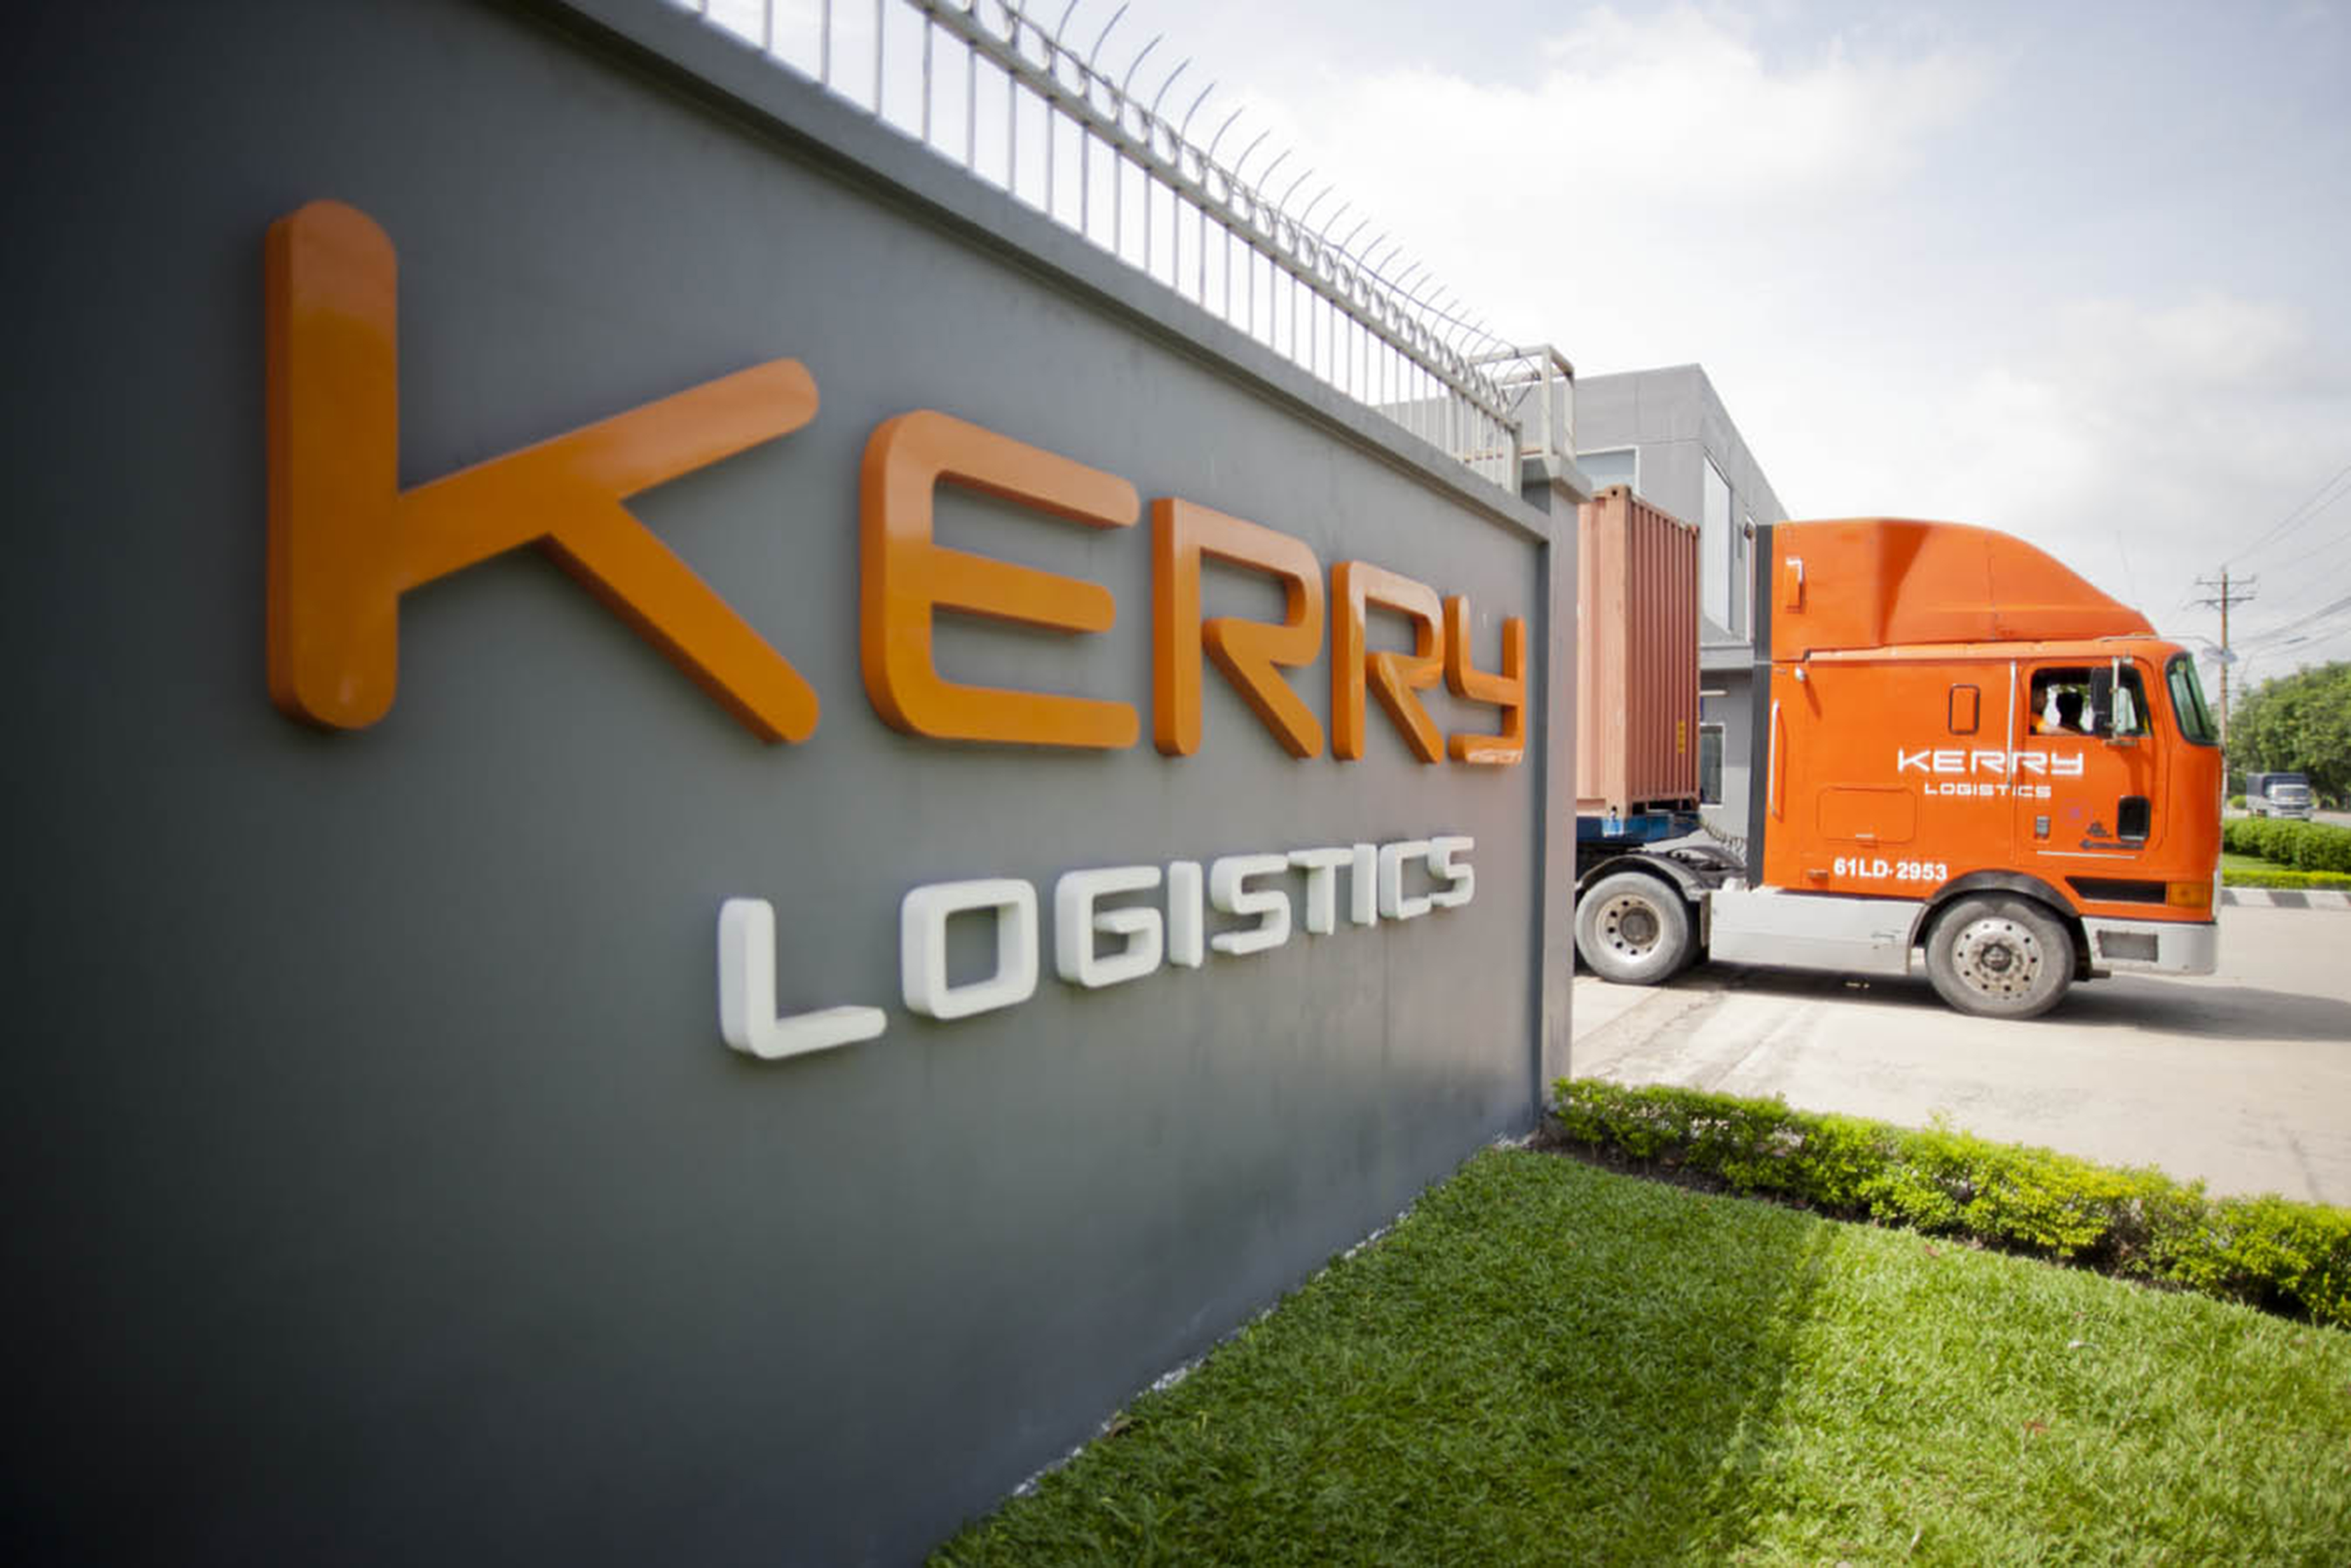 Kerry Logistics trucks moving out of their plant to deliver packages as the company growth in its net profit for the first half of the year. Photo: SCMP Pictures